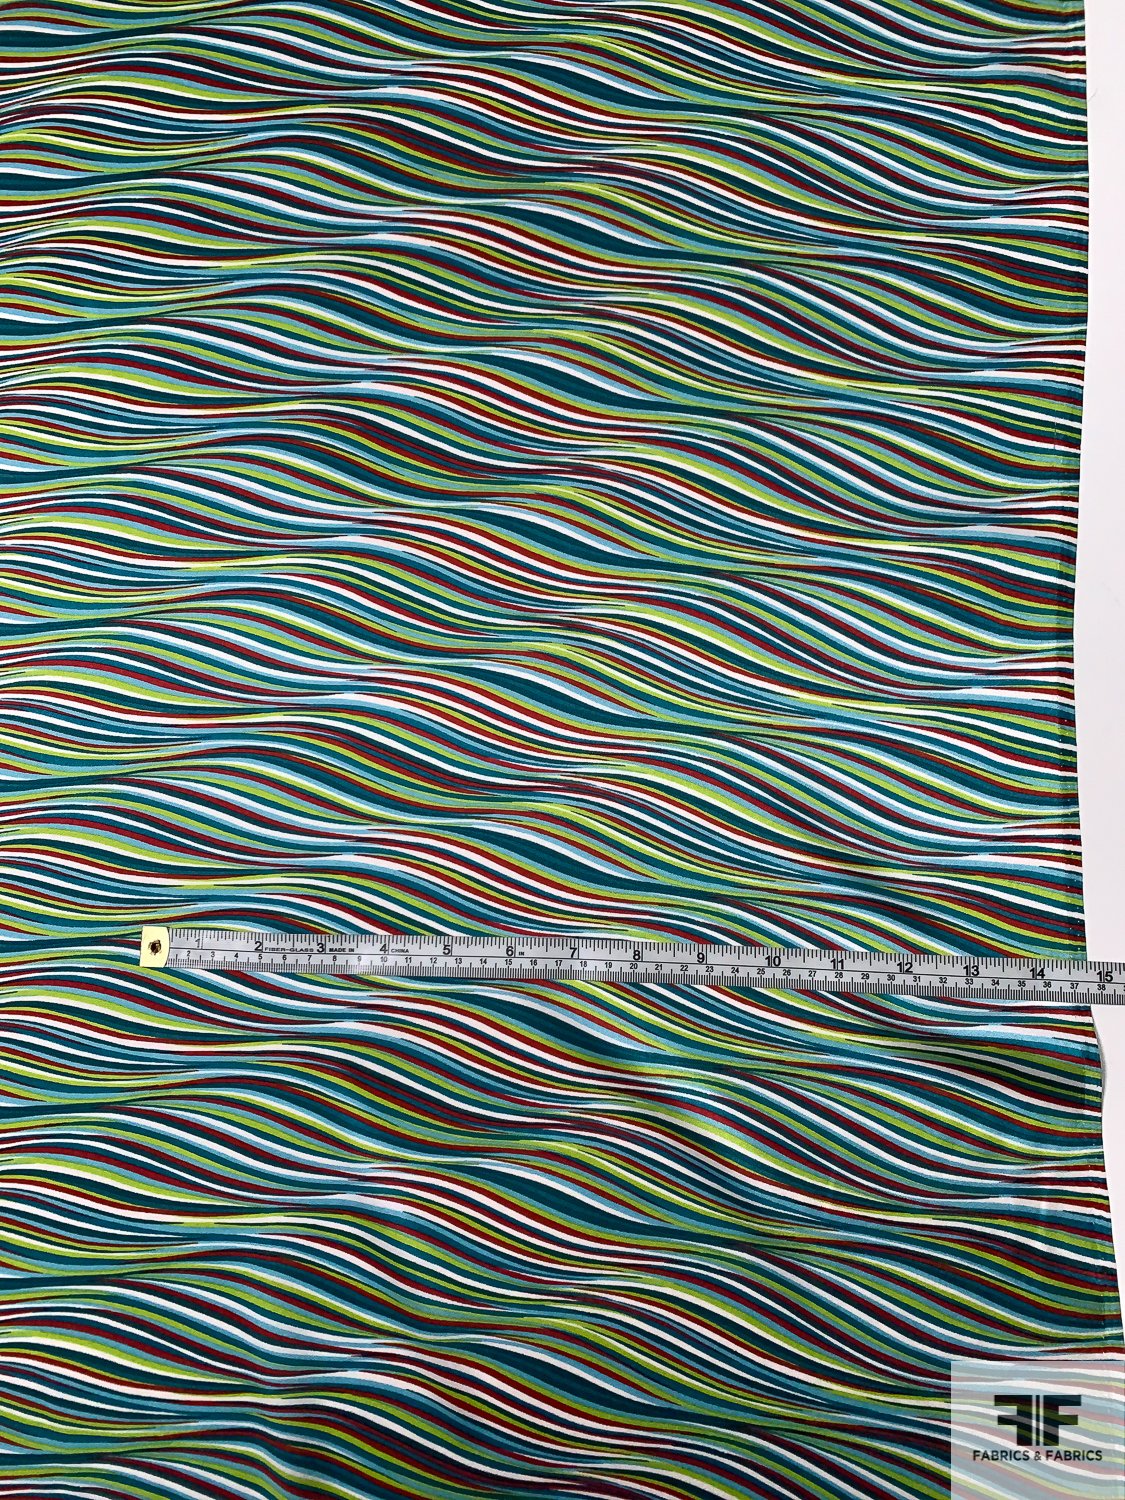 Wavy Striations Printed Silk Charmeuse - Shades of Teal / Green / Red